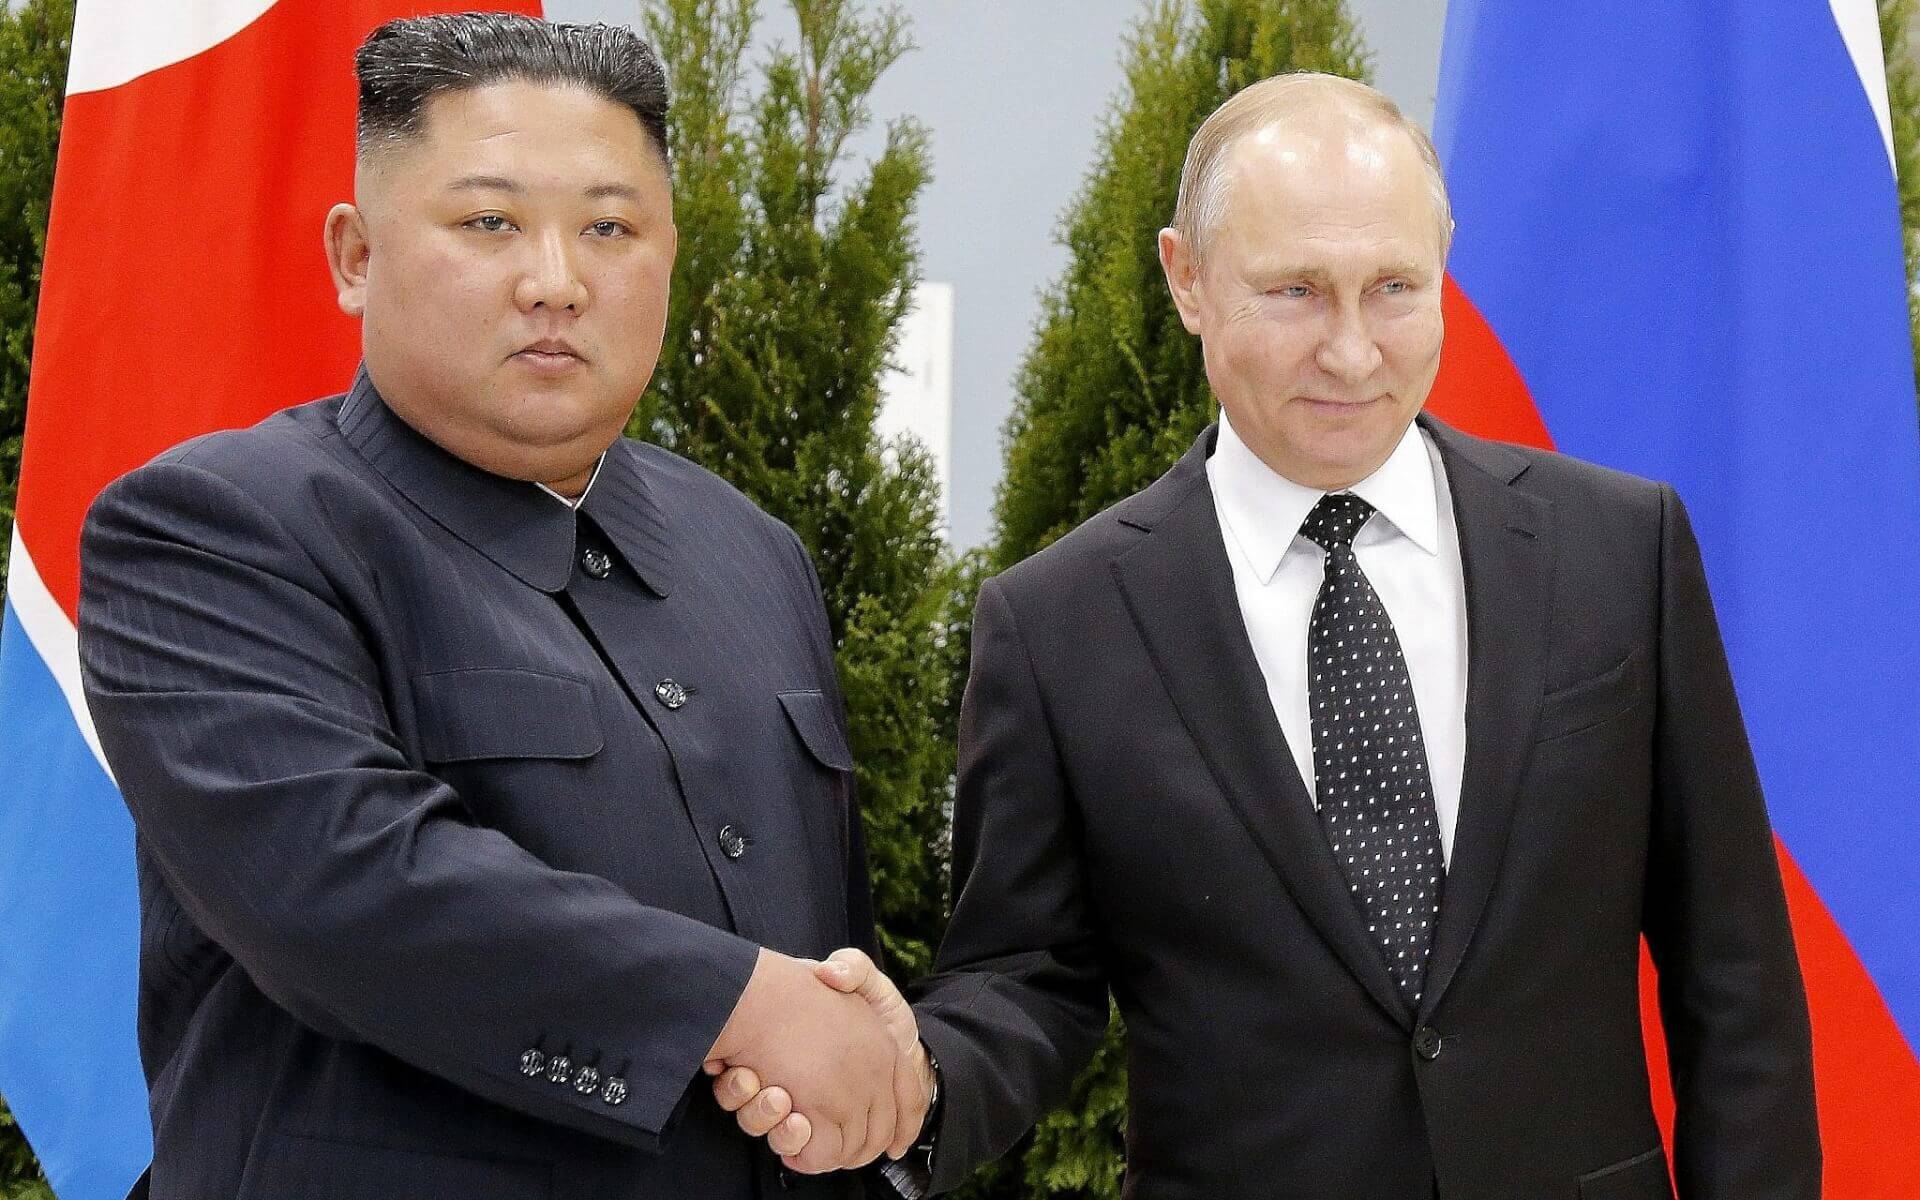 Negotiations on the Korean Peninsula Must Find a Way to Leverage Russia’s Unique Value